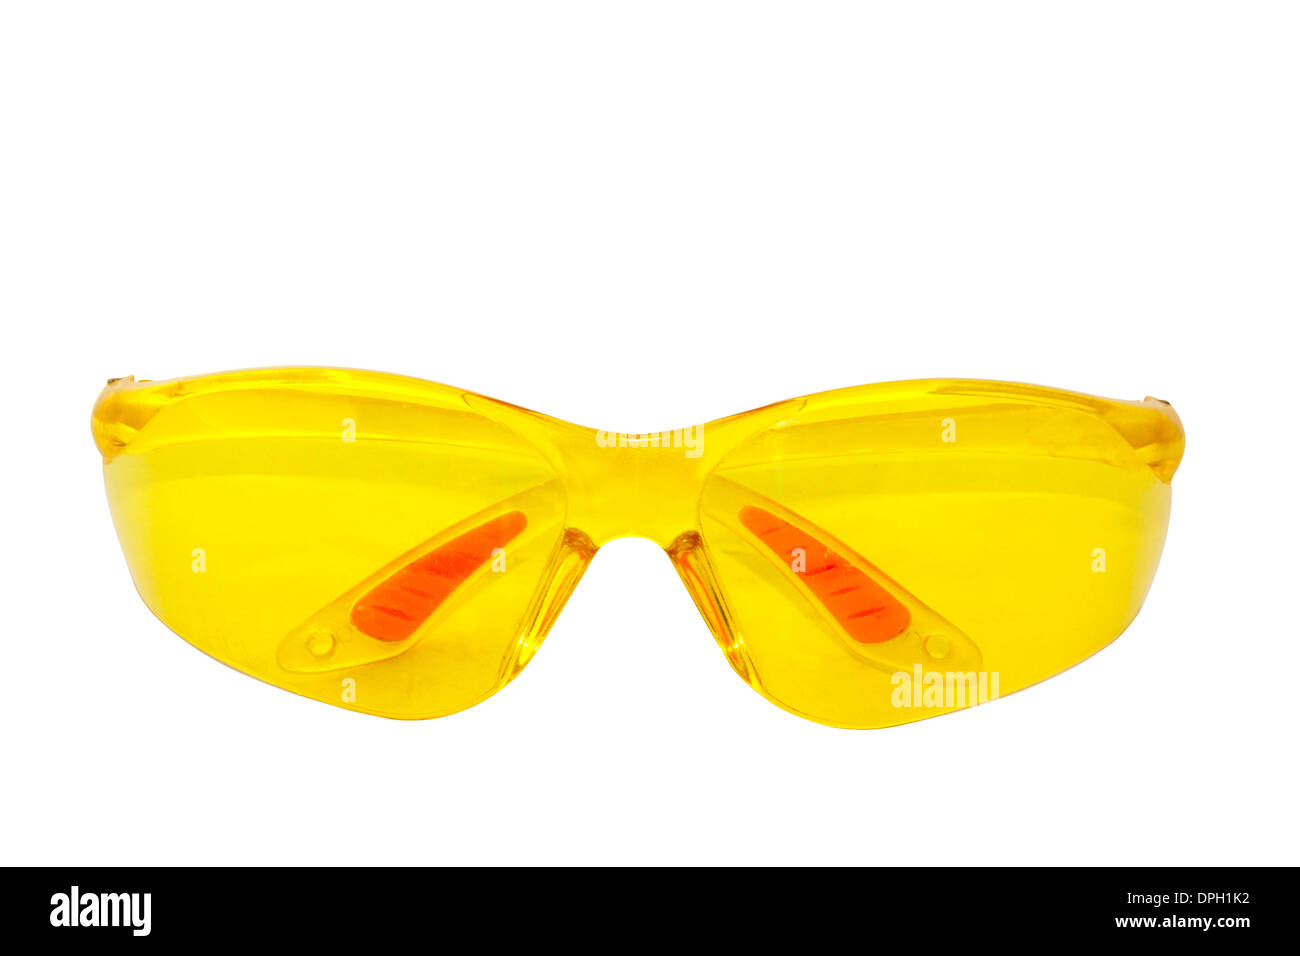 isolated paid of yellow plastic protective glasses Stock Photo